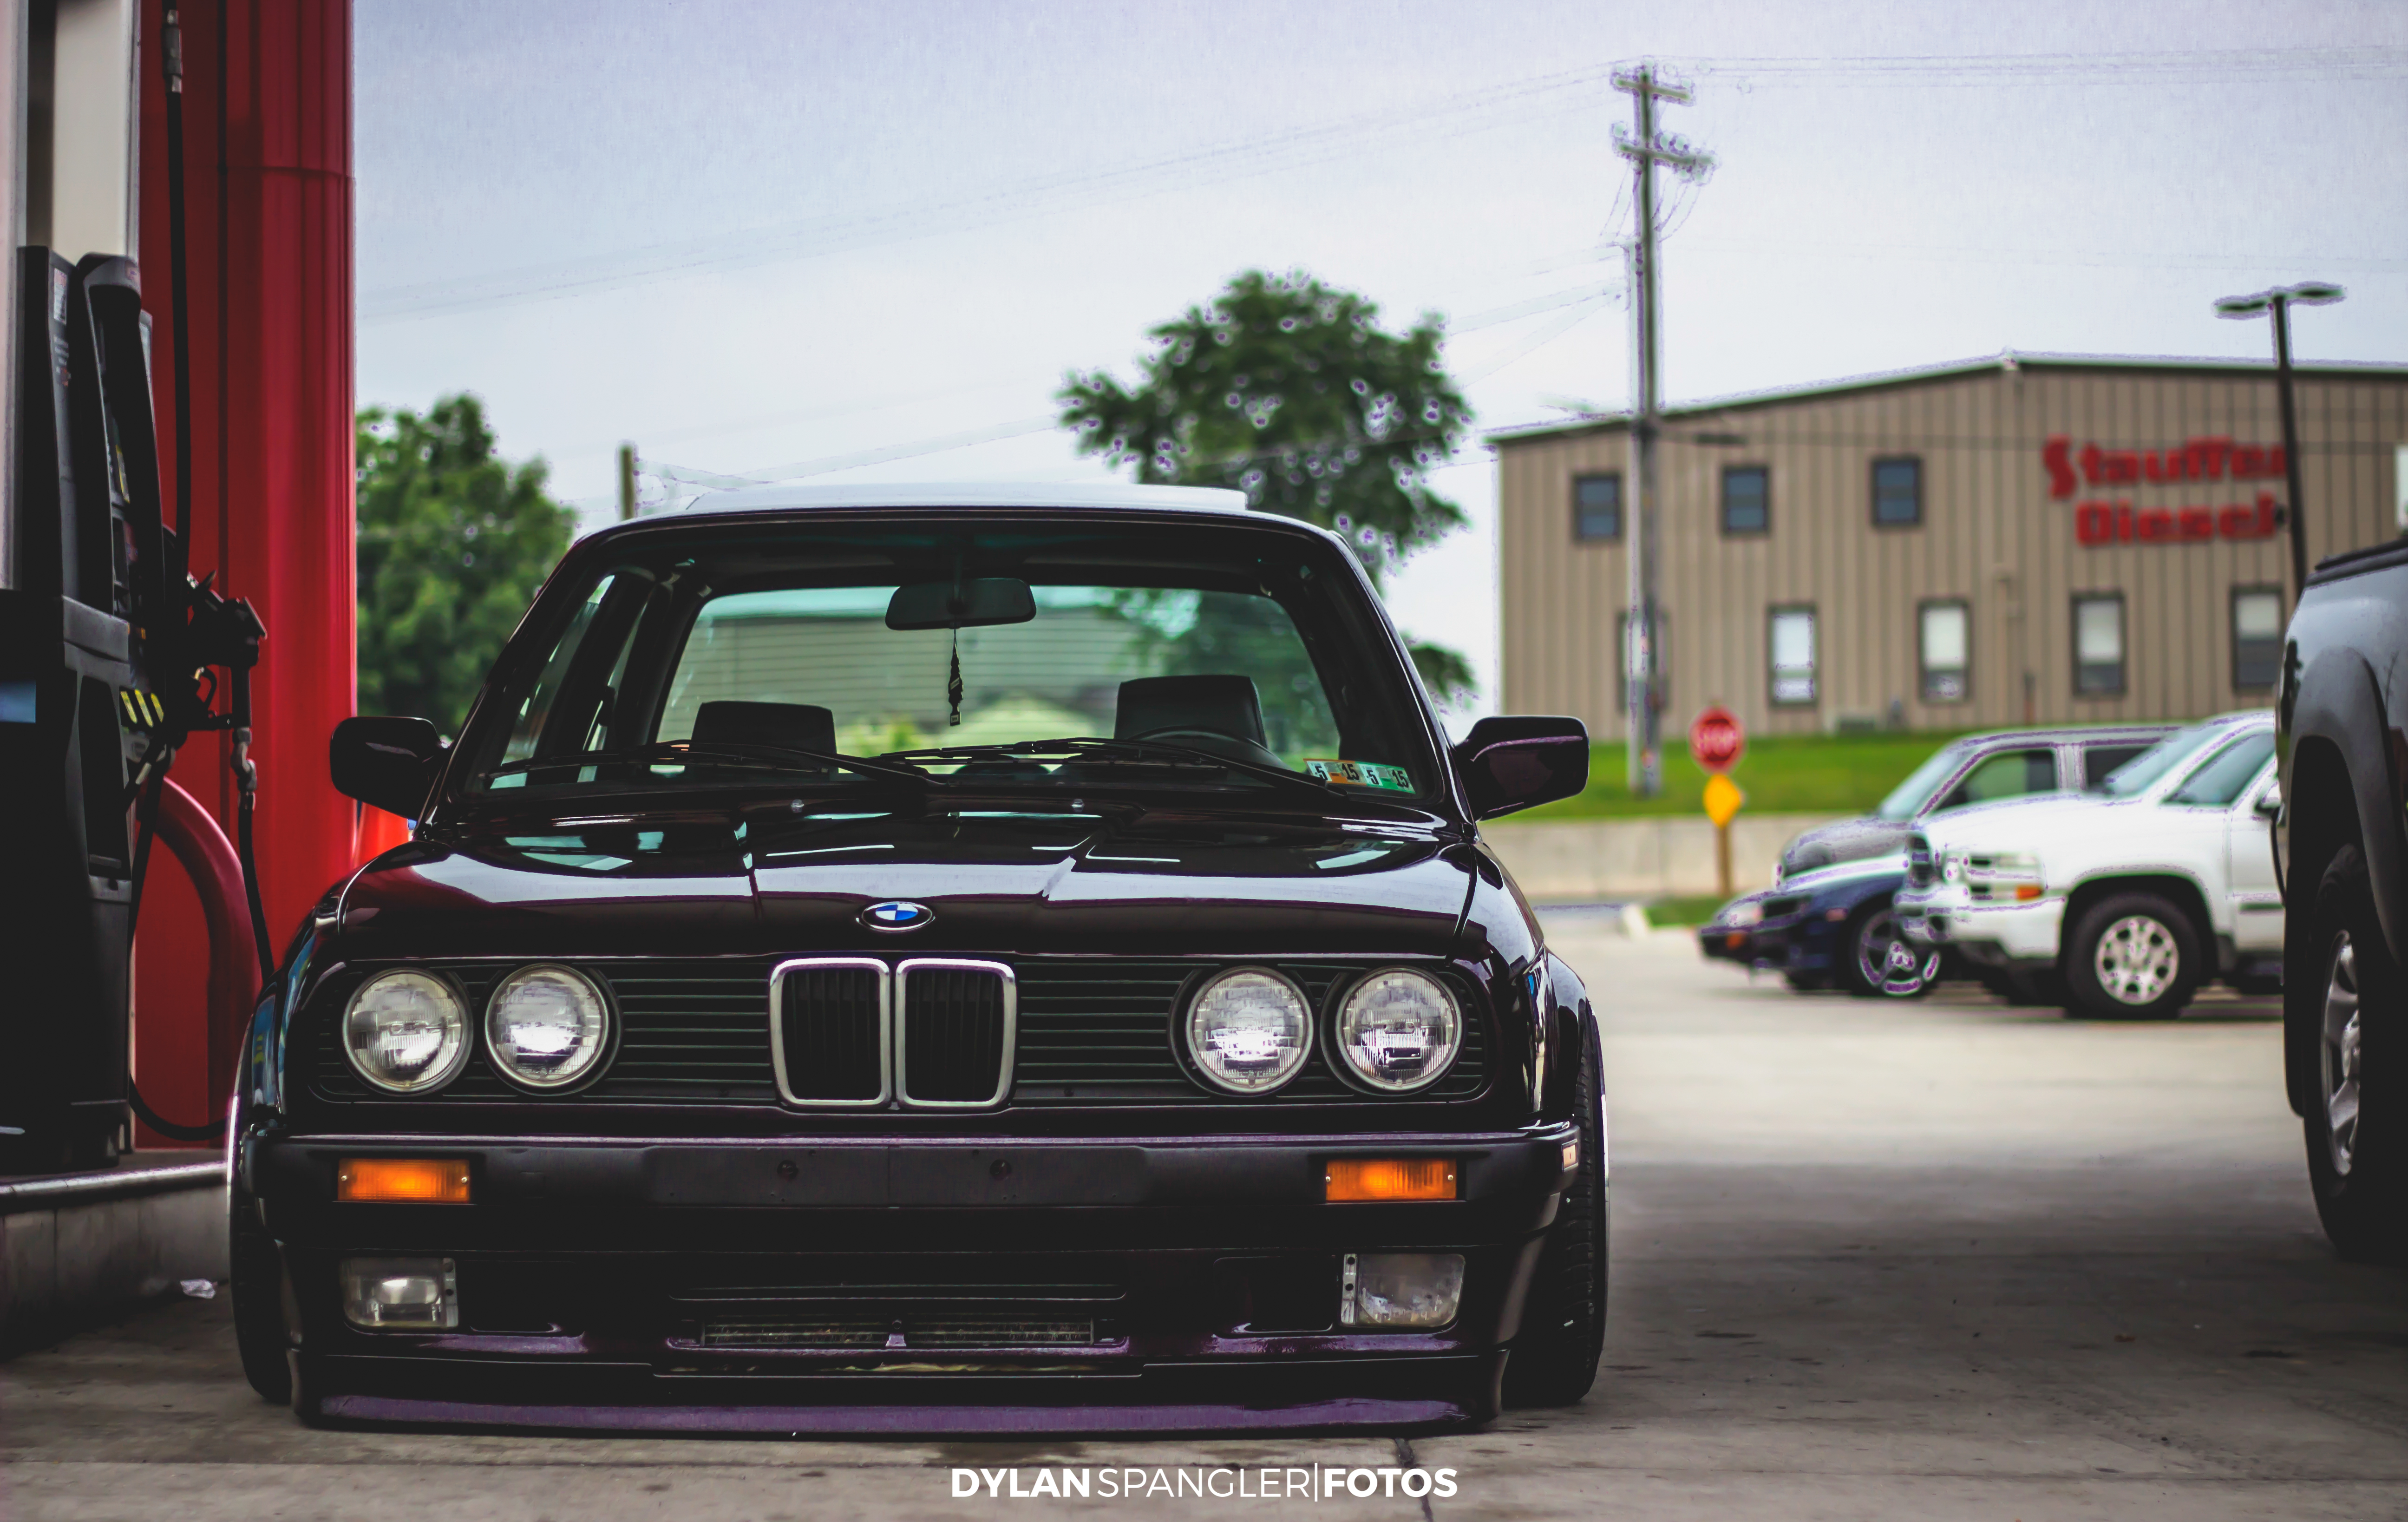 bmw, cars, front bumper, gas station High Definition image